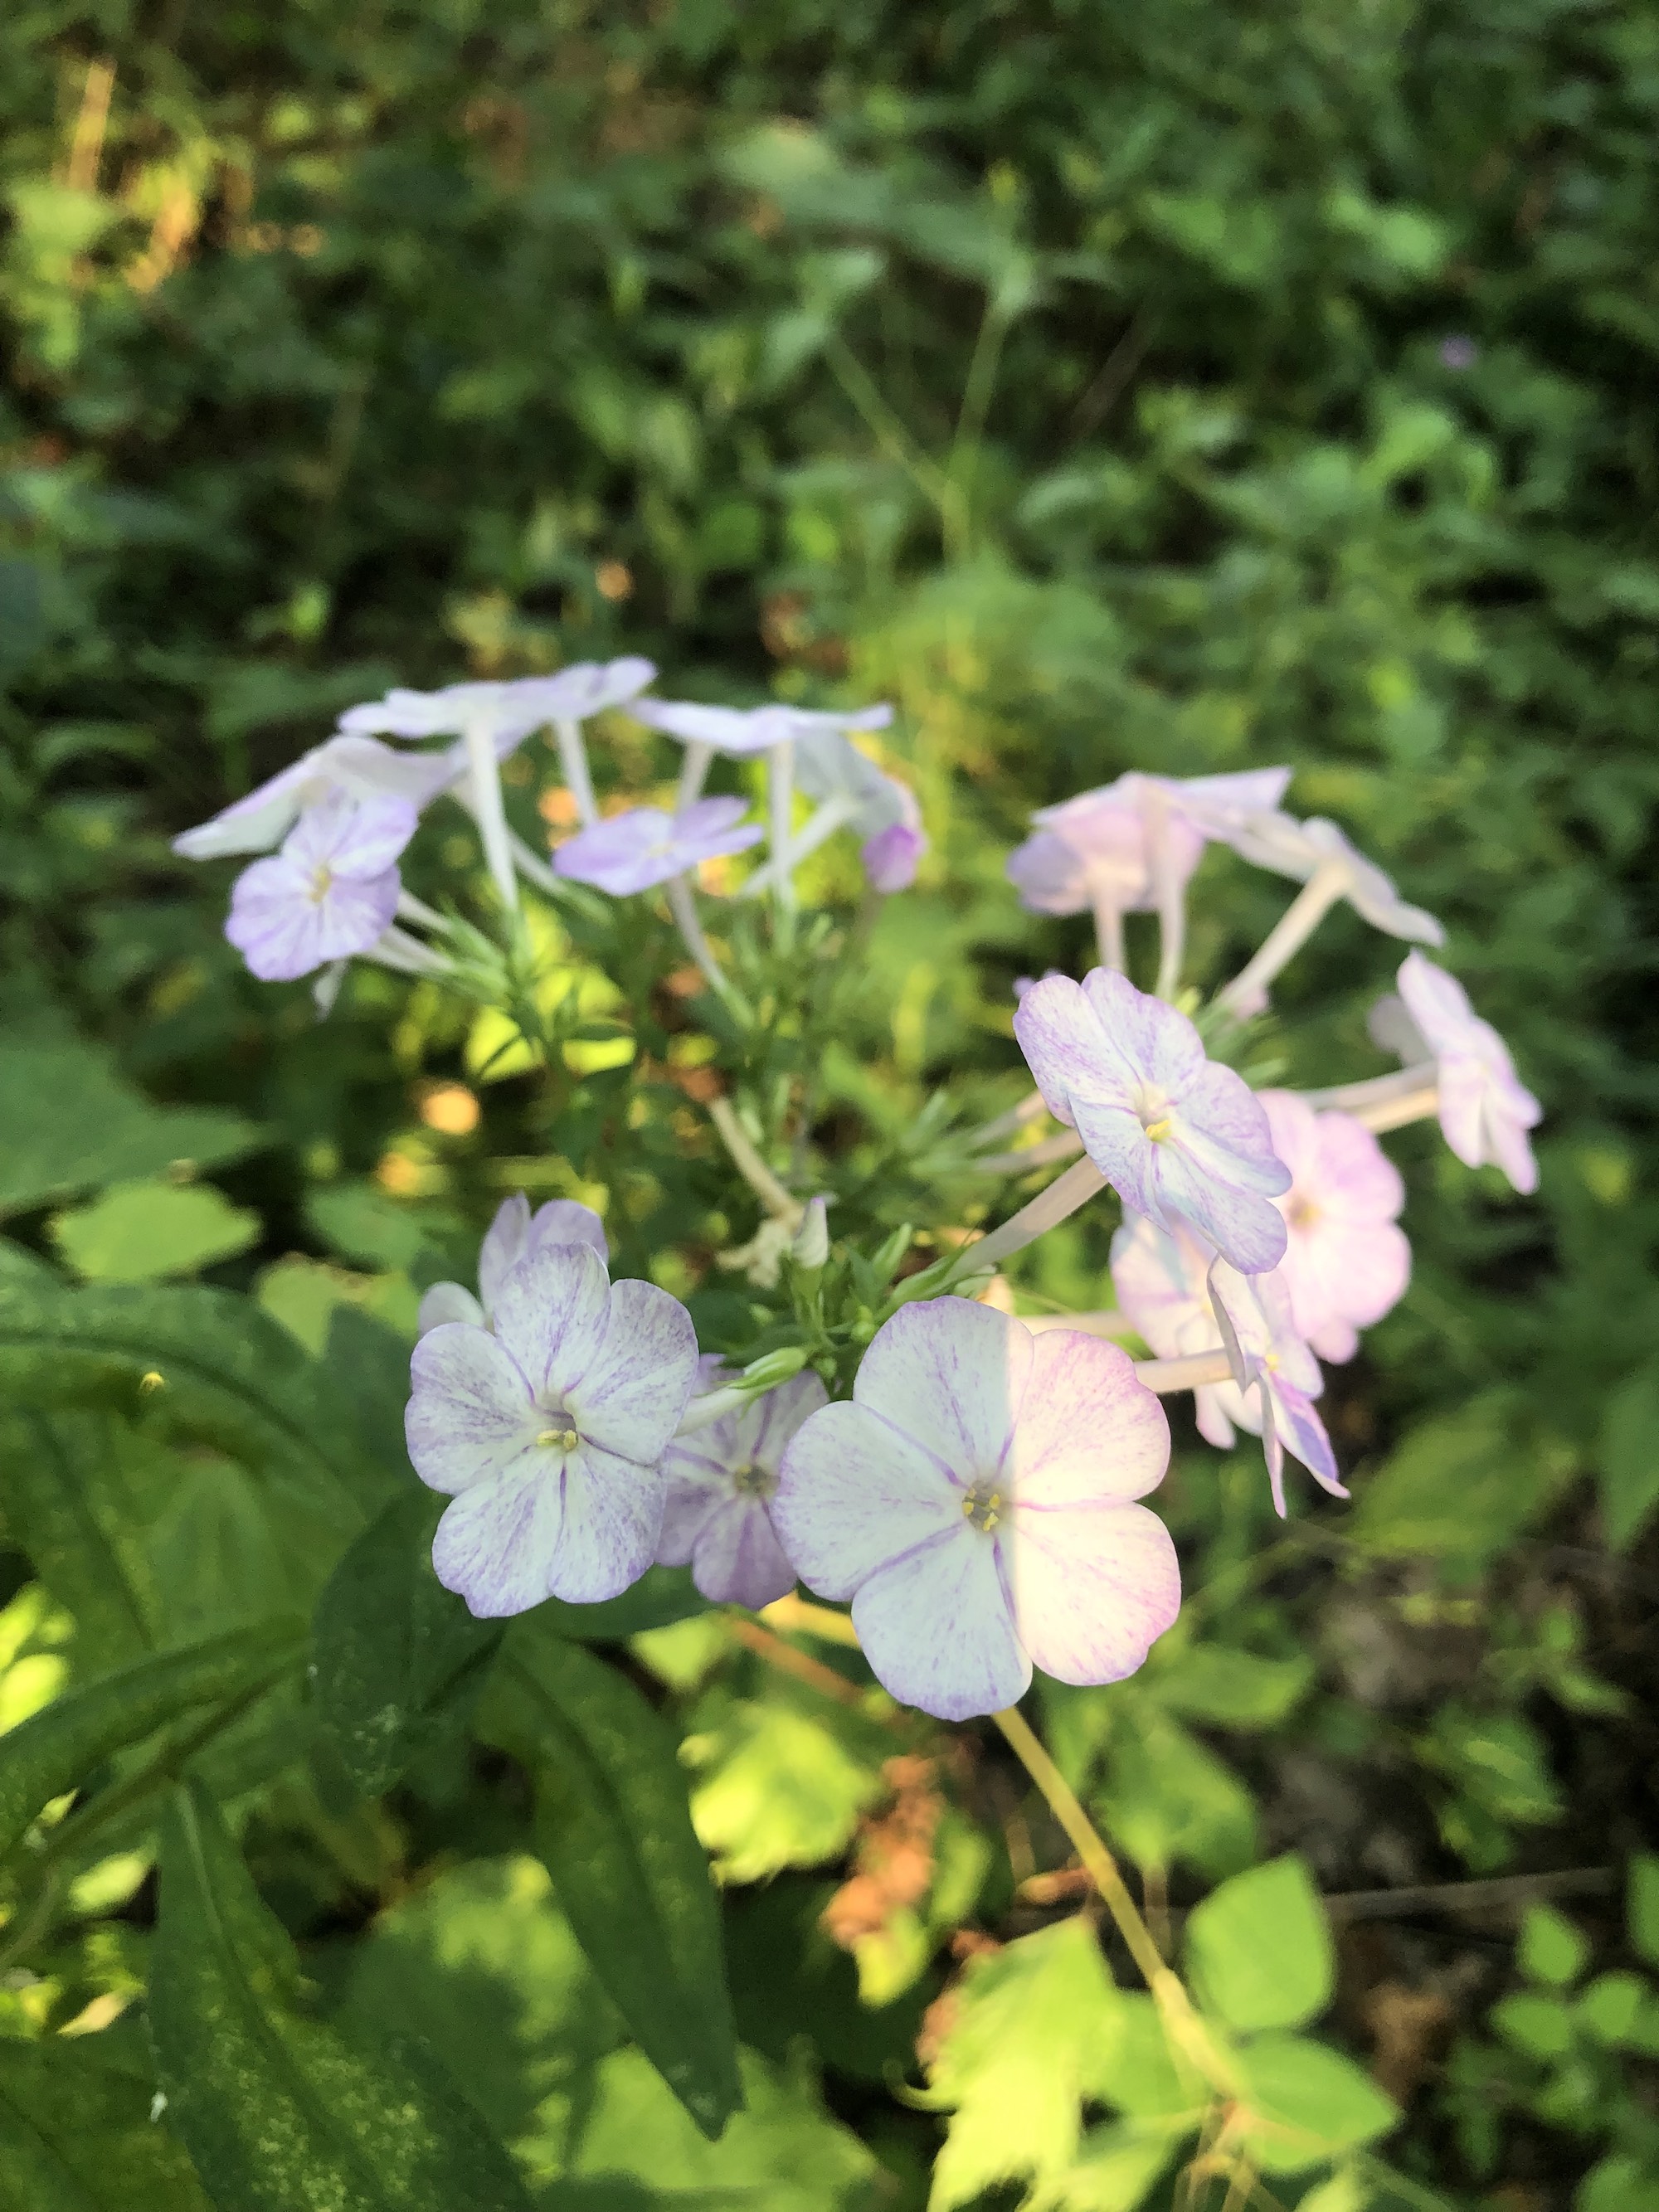 Tall Garden Phlox by Duck Pond on July 13, 201.